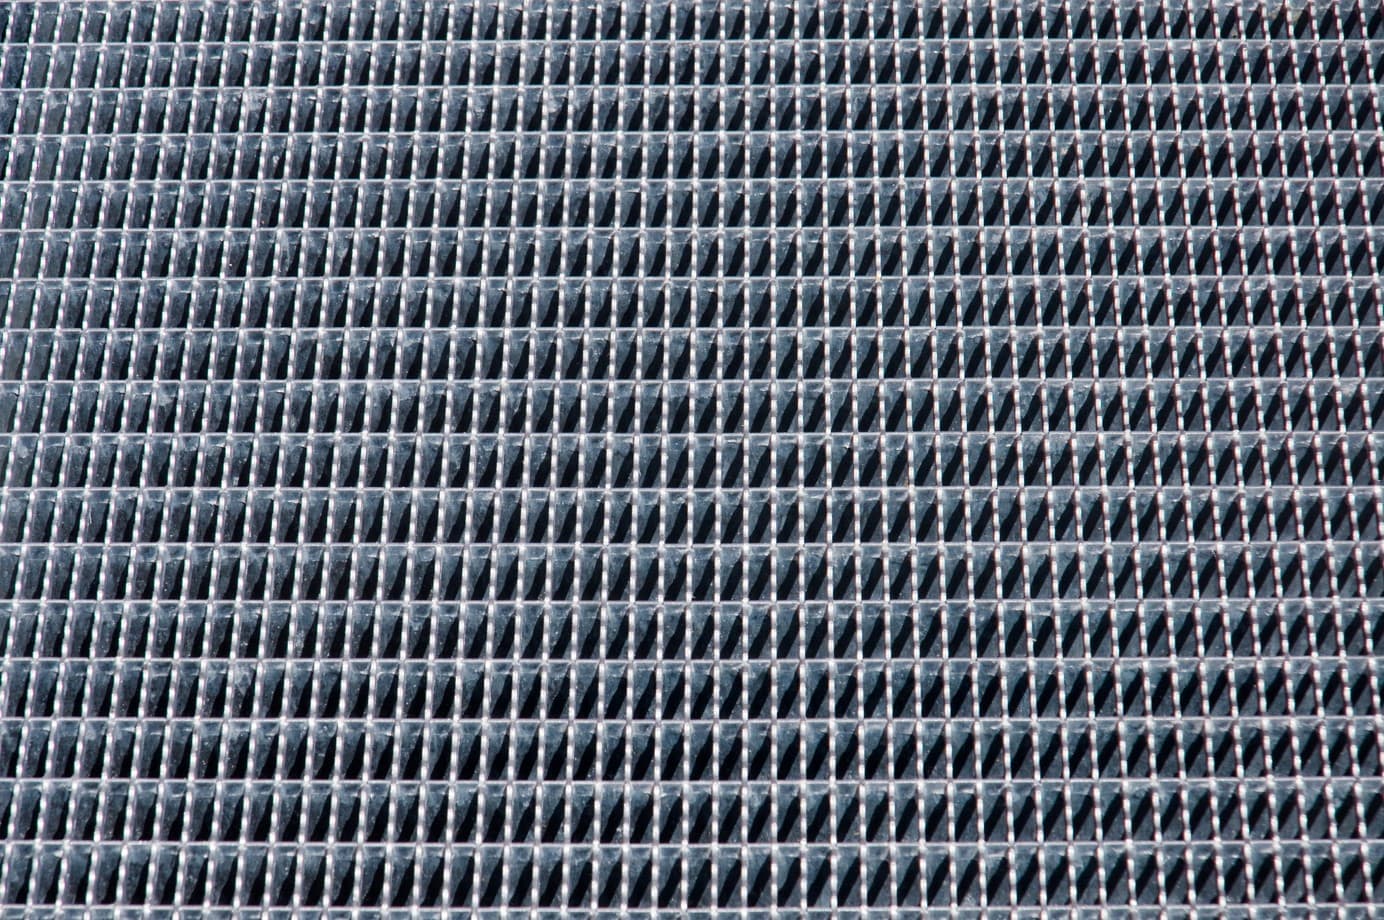 Can steel grating be painted?